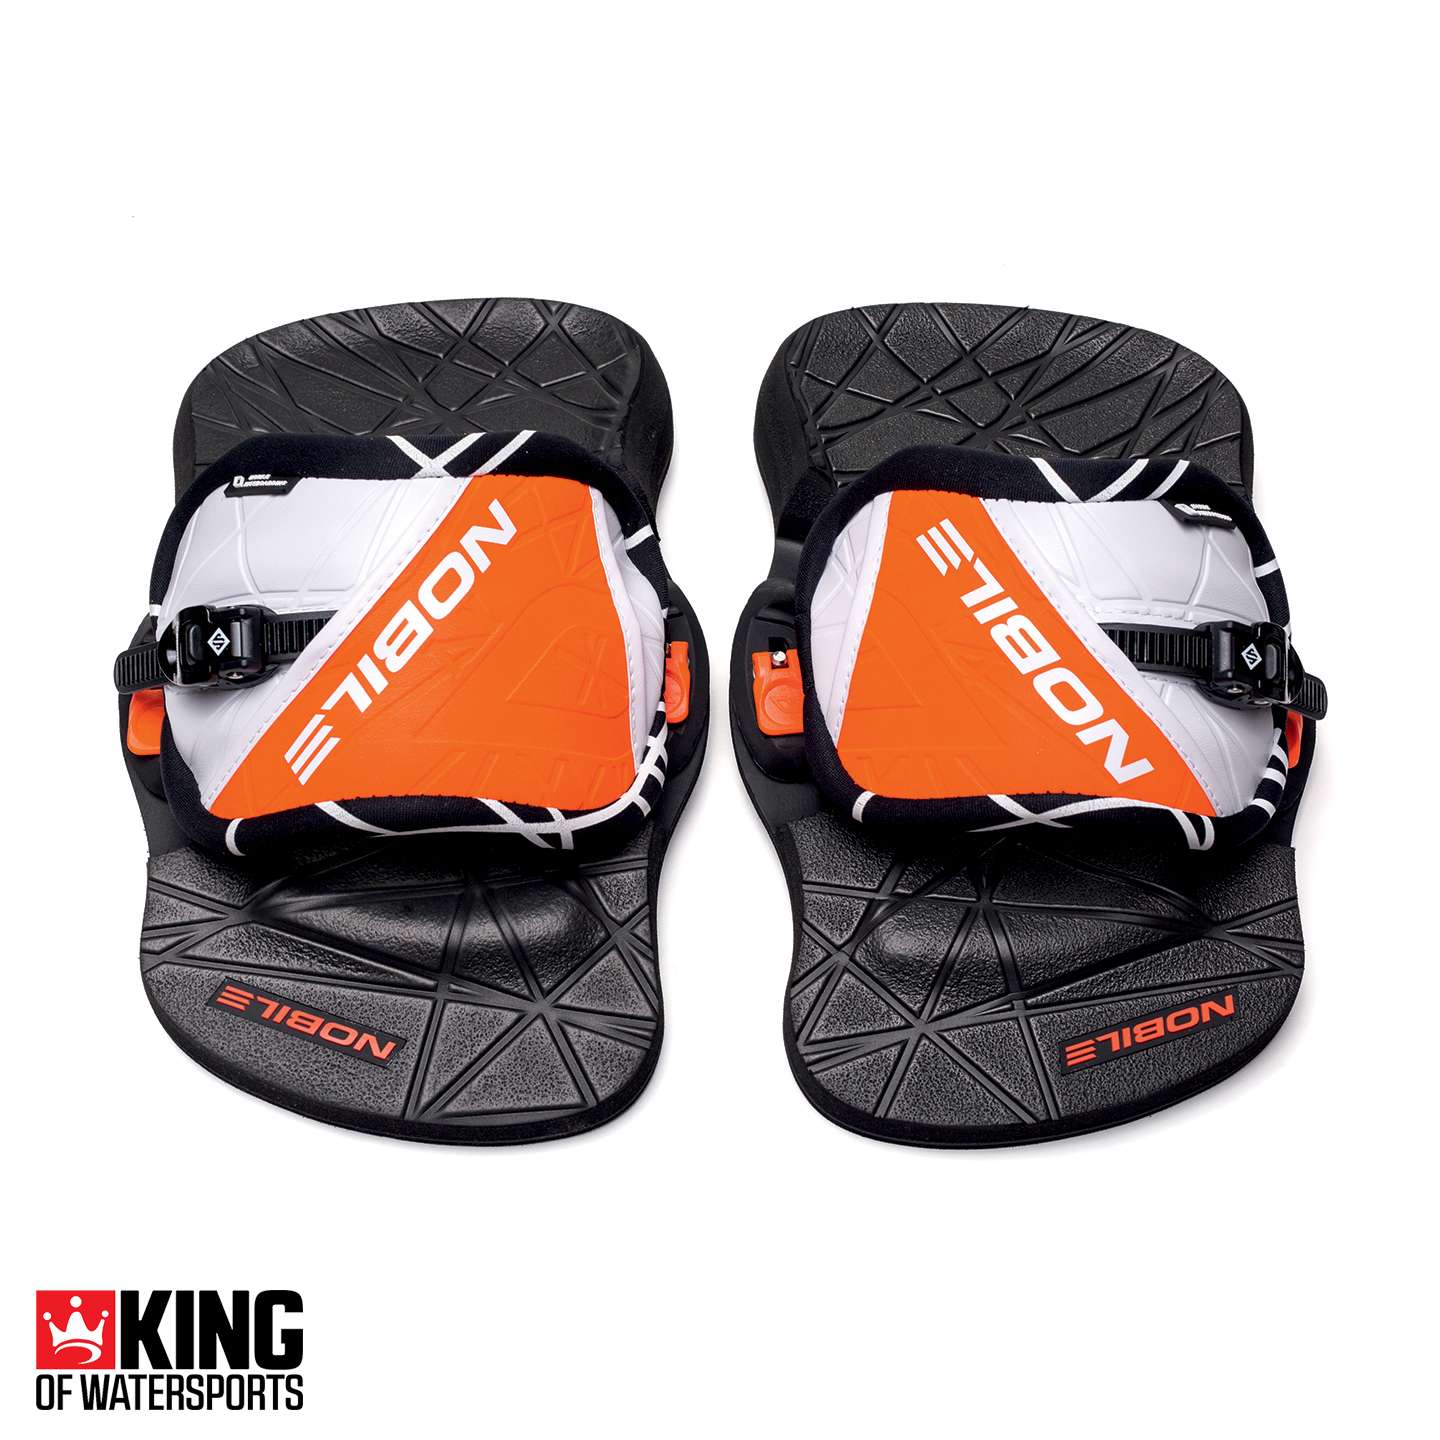 Nobile Click & Go IFS Gen 2 Pads & Straps | King of Watersports